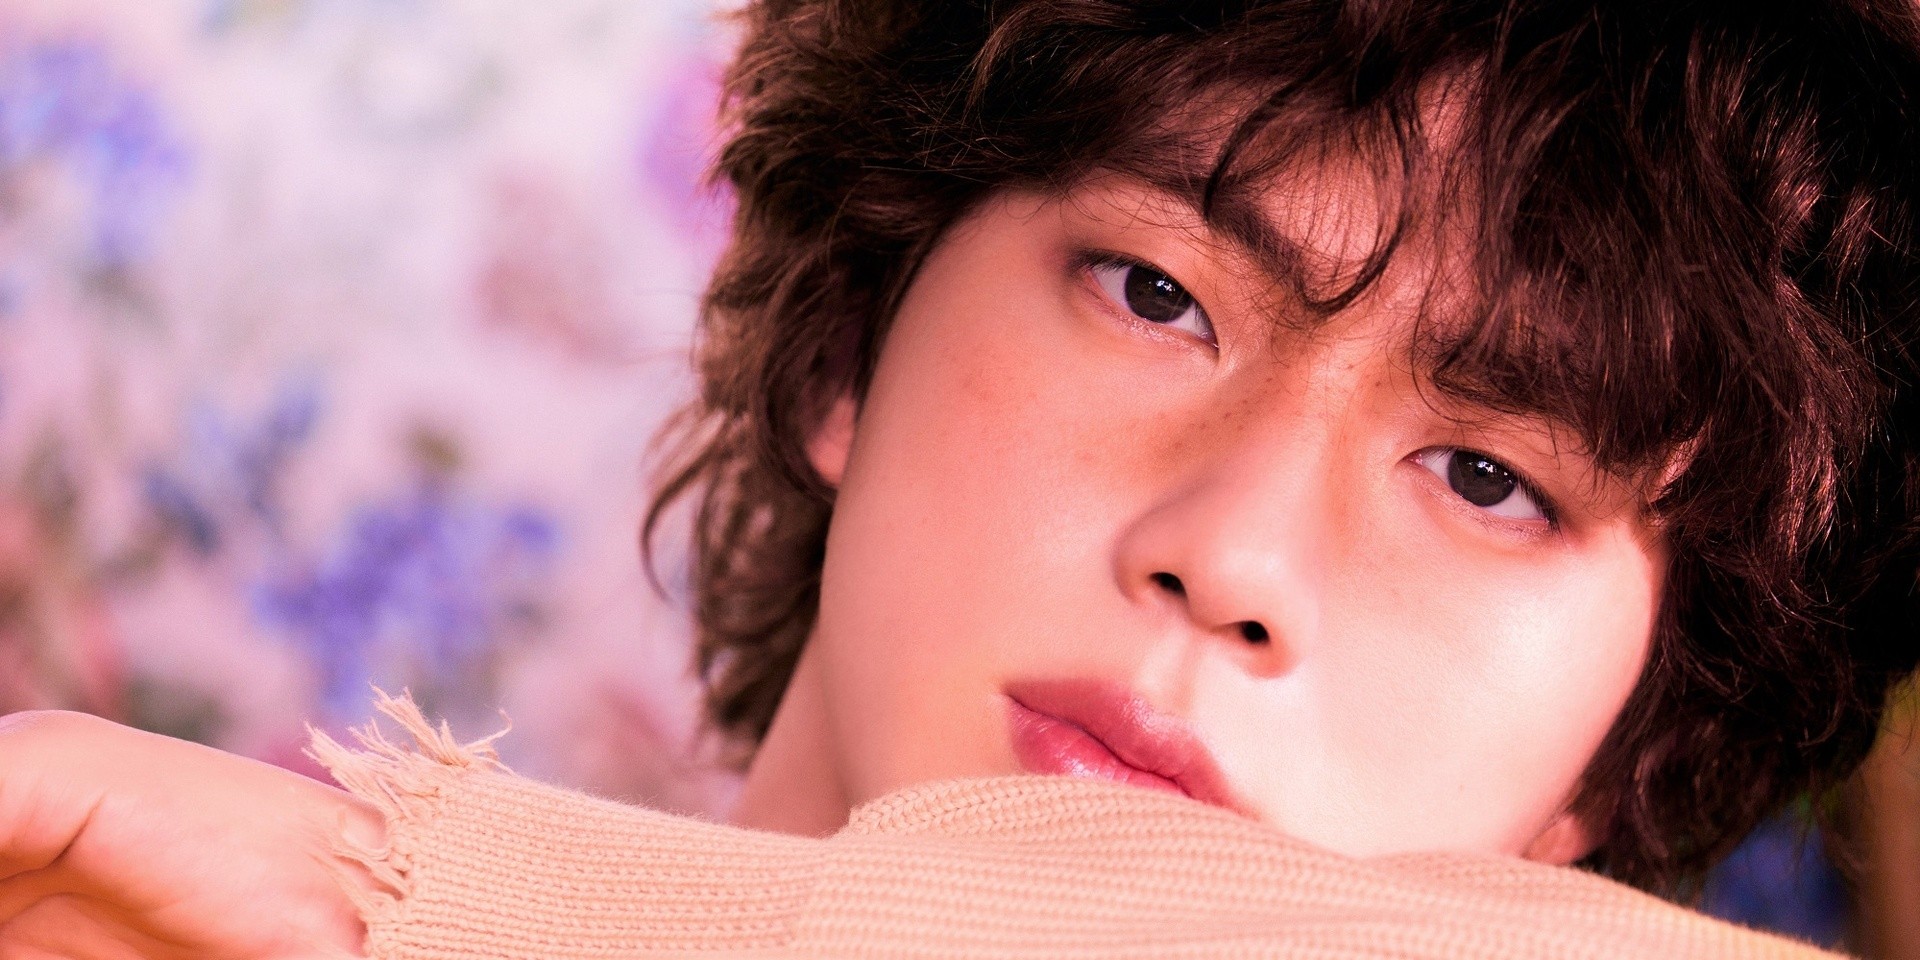 13 songs by BTS' Jin you need to check out